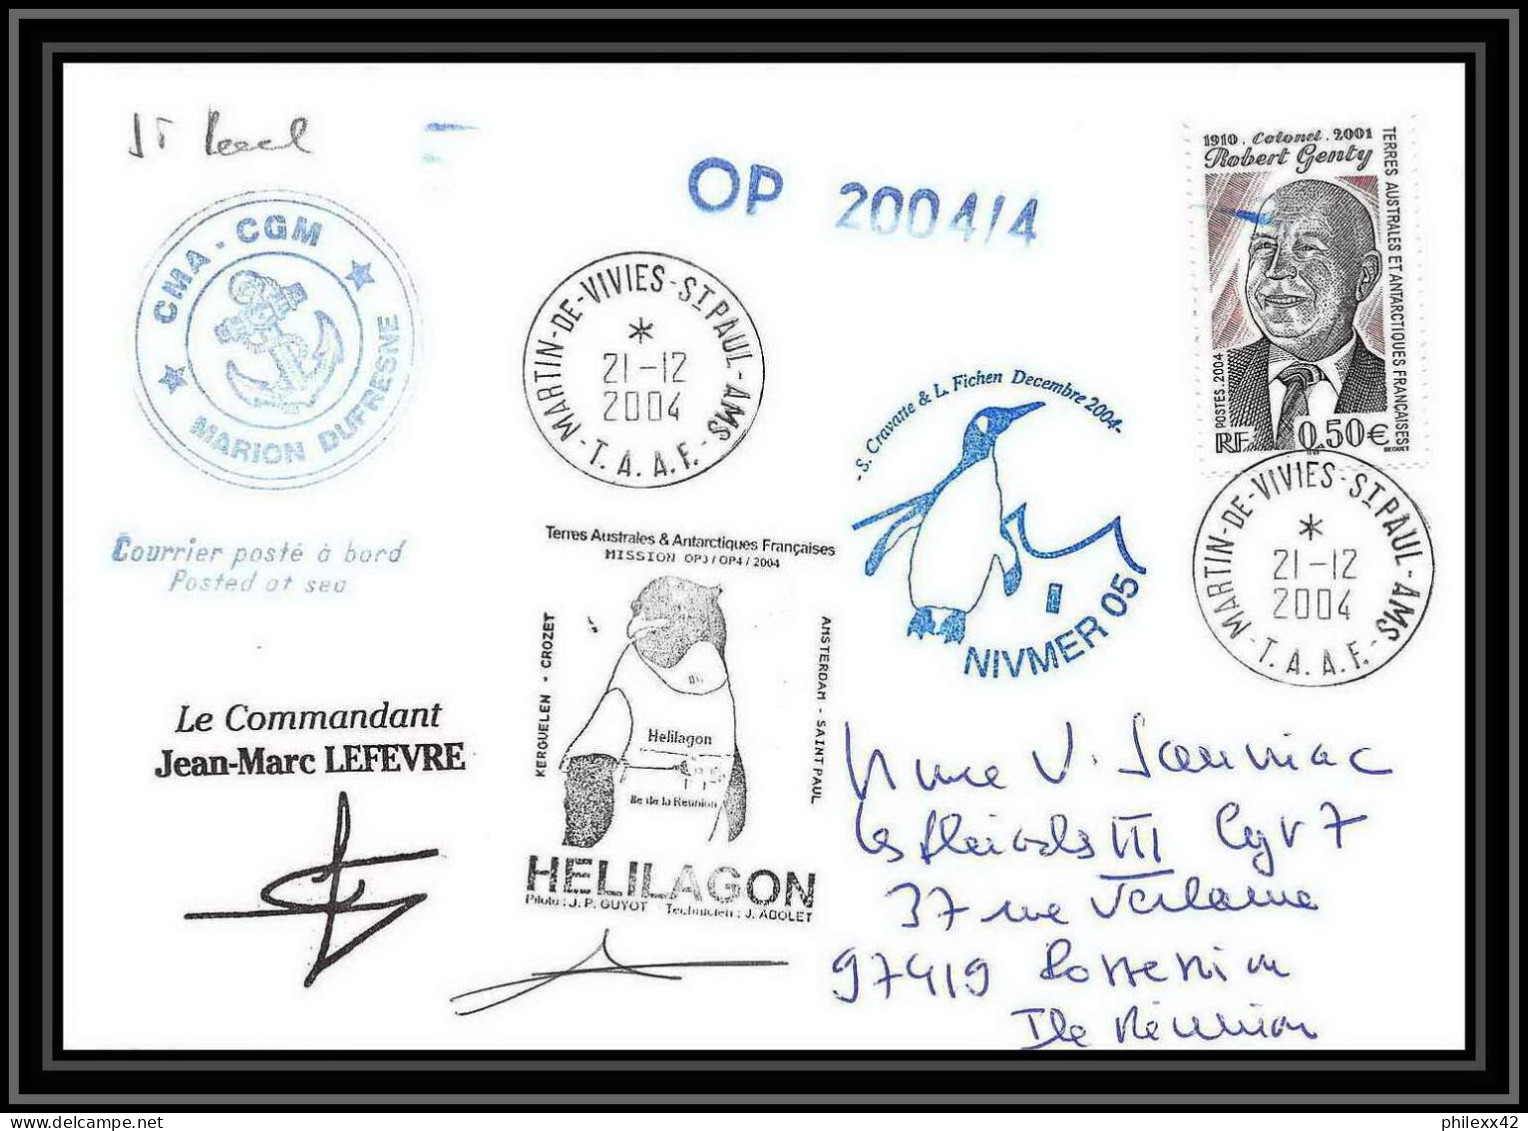 2480 ANTARCTIC Terres Australes TAAF Lettre Cover Dufresne 2 Signé Signed OP 2004/4 N°392 21/12/2004 Helilagon - Helikopters